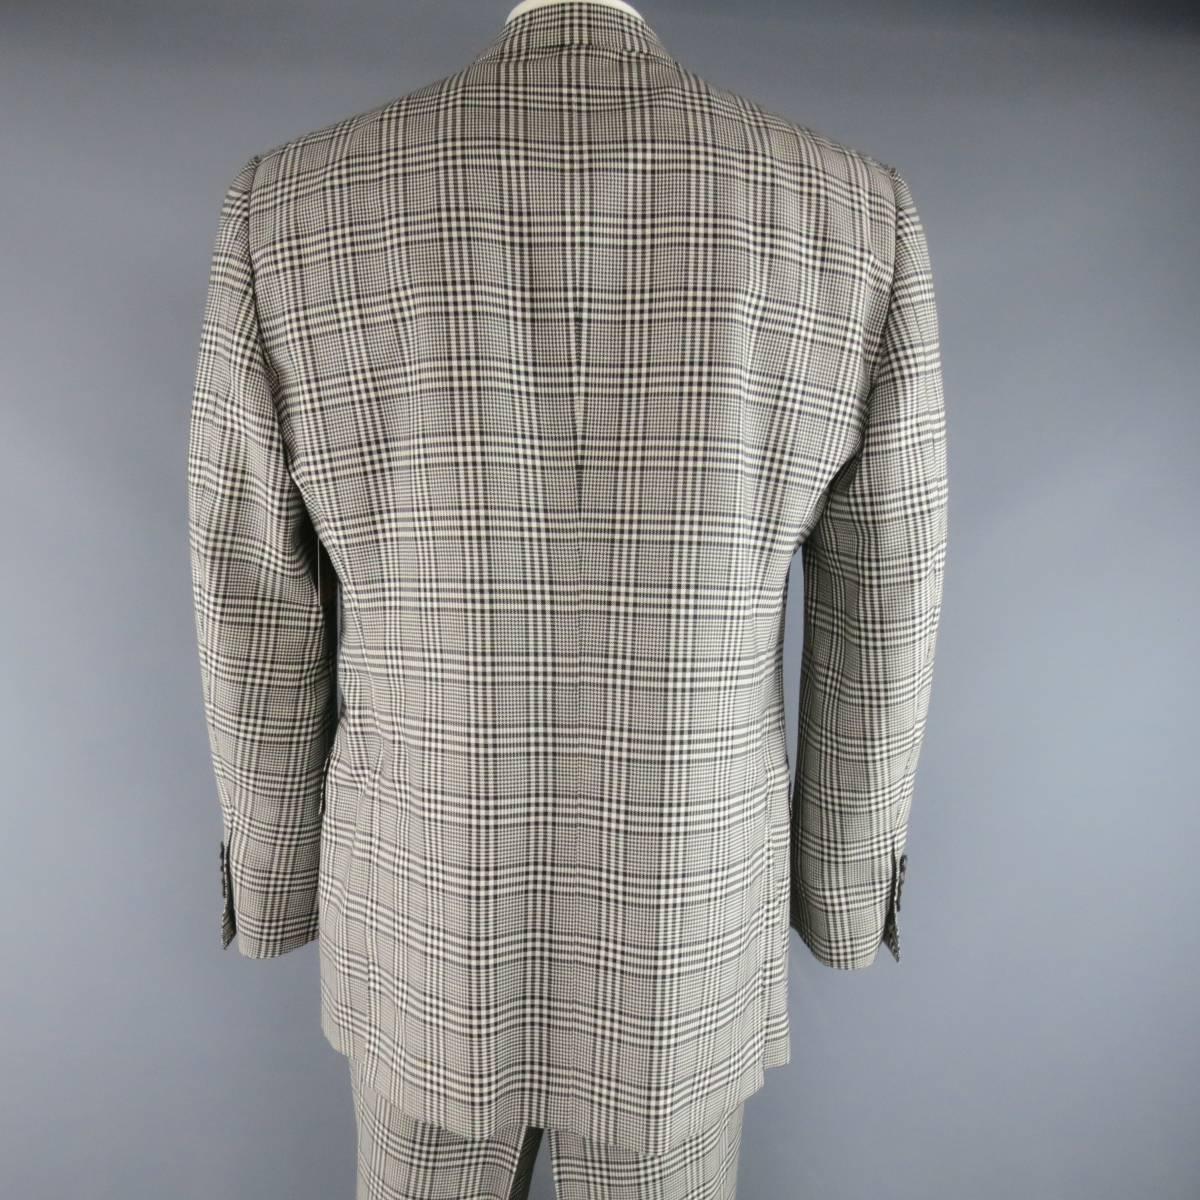 Gray Tom Ford Black and White Glenplaid Wool / Mohair 2 Piece Peak Lapel Suit